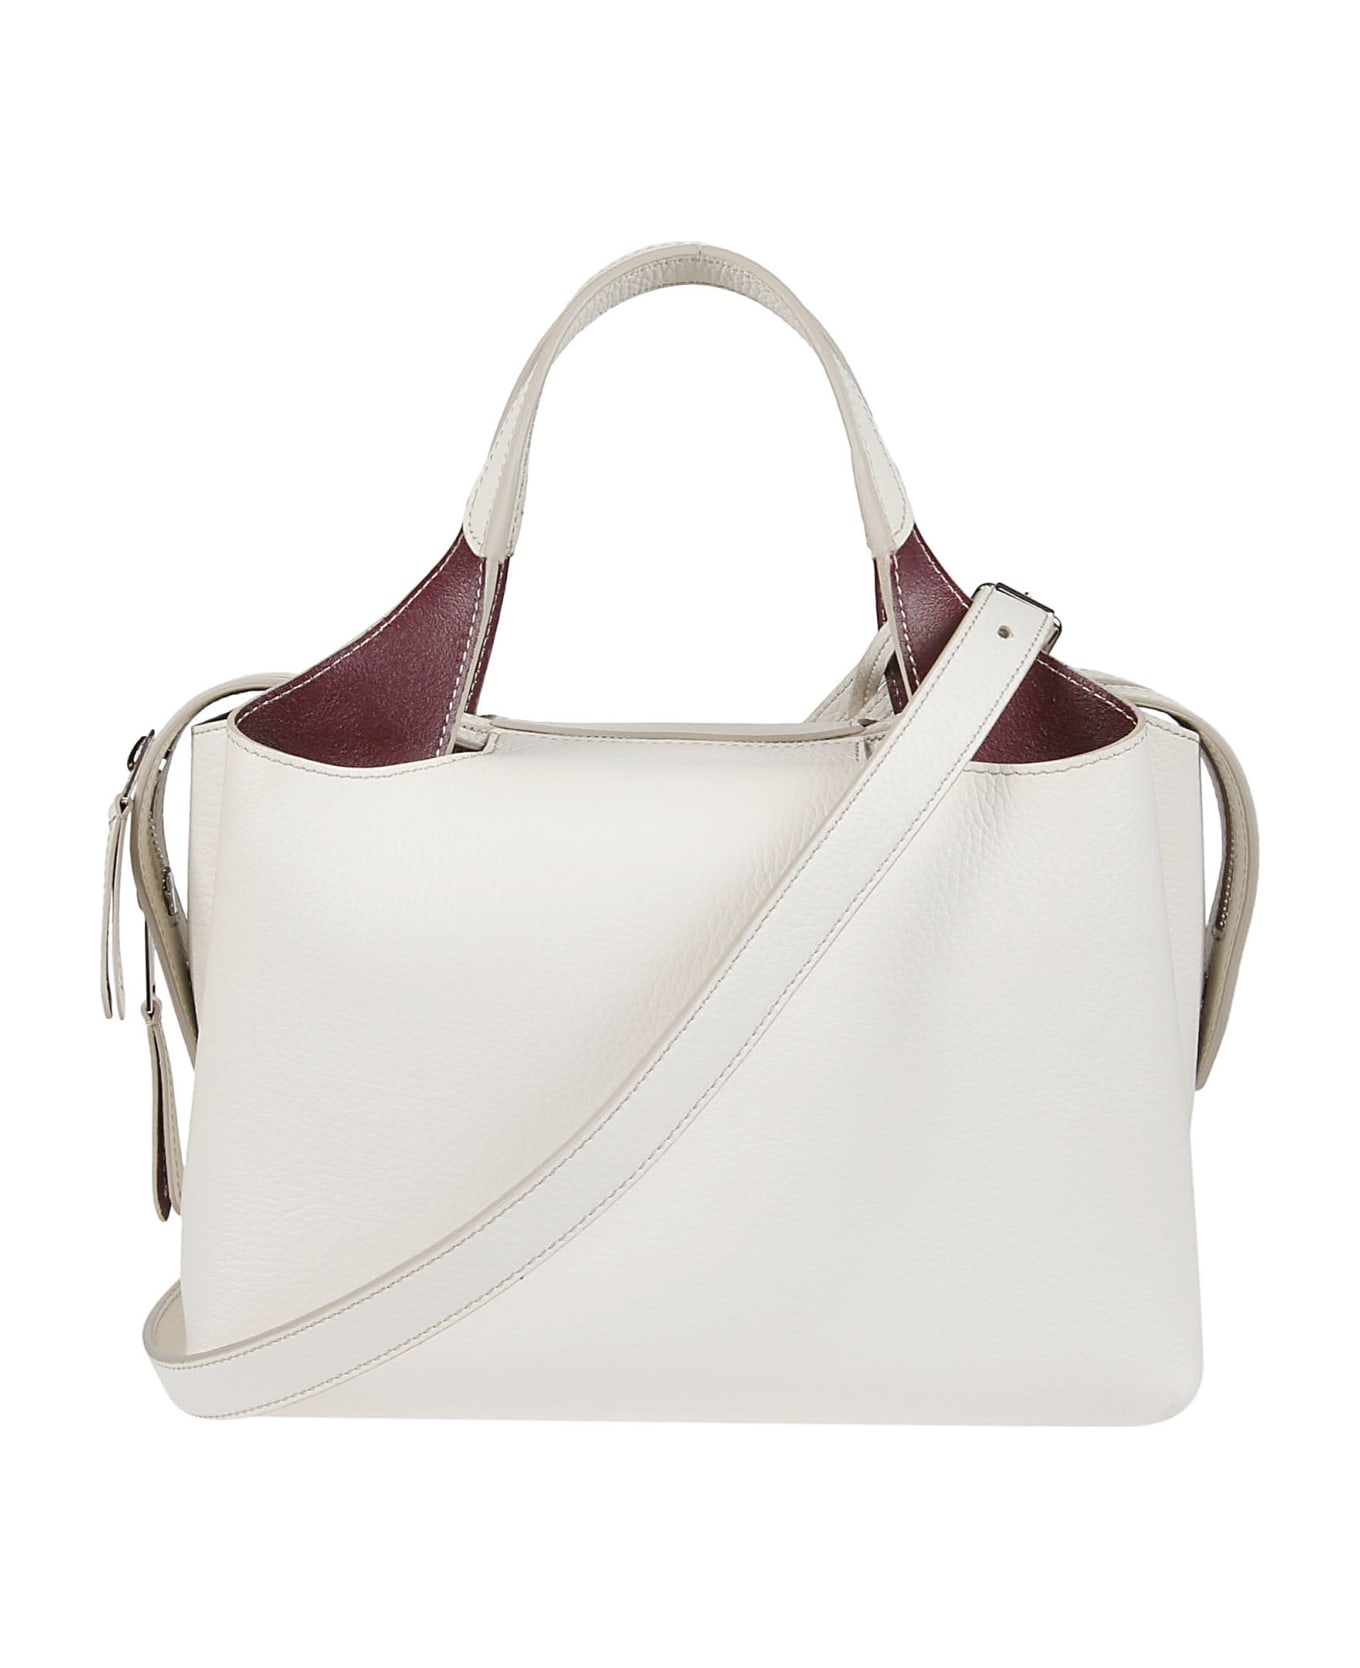 Tod's Top Zipped Dual Handle Tote - Bianco Calce/bordeaux Scuro